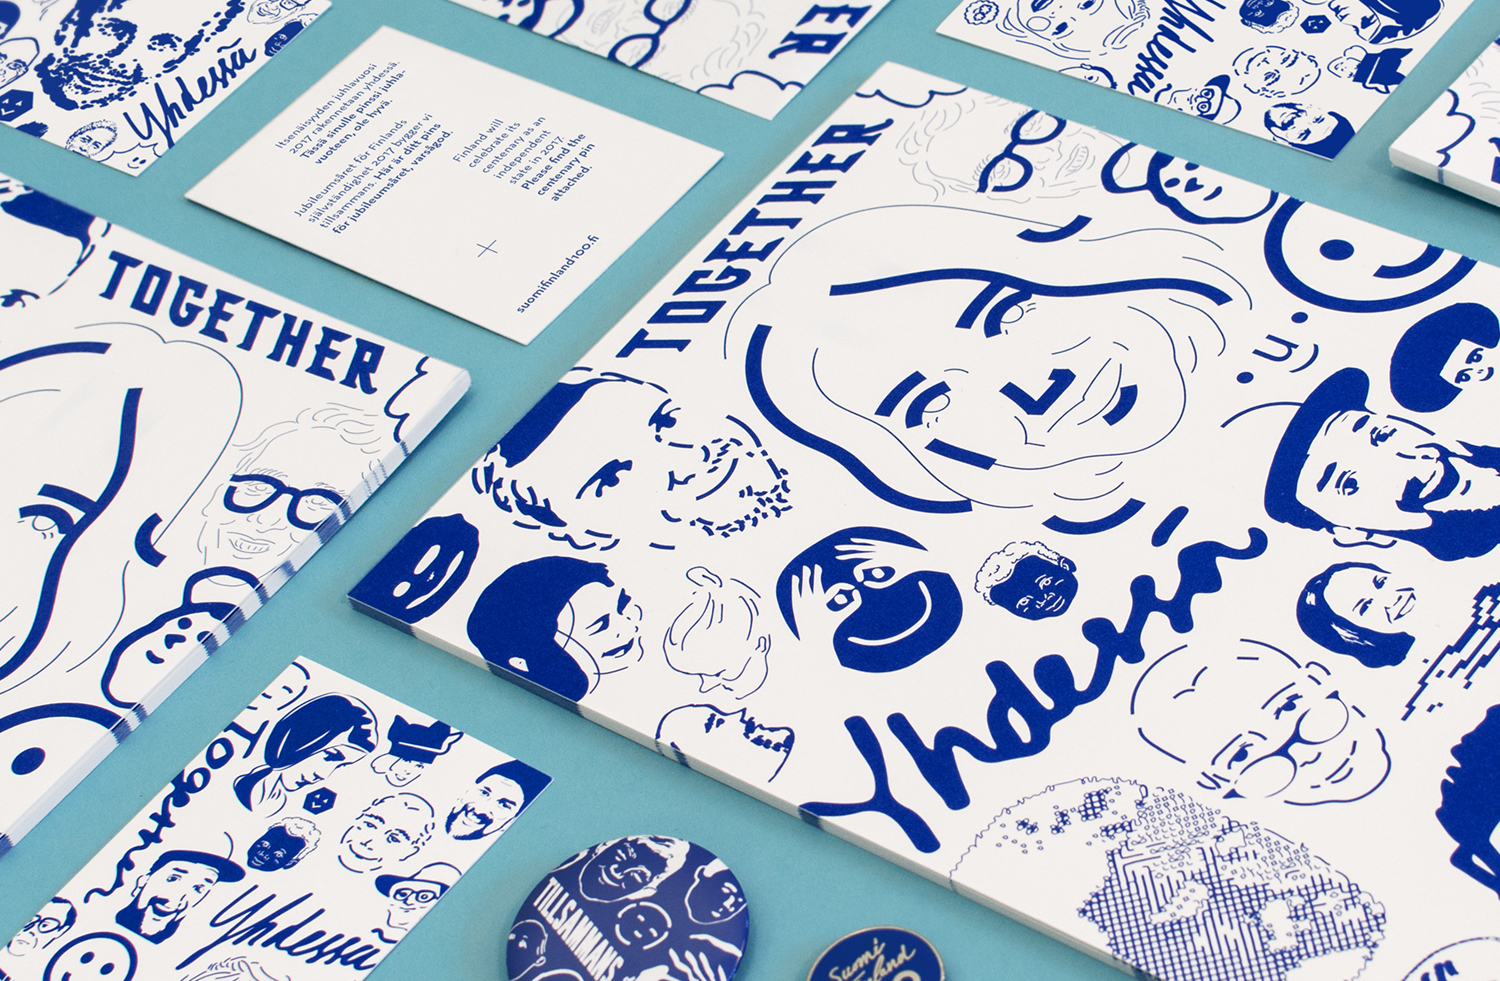 Brand identity, illustration and print by Kokoro & Moi for the celebration of Finland's centenary